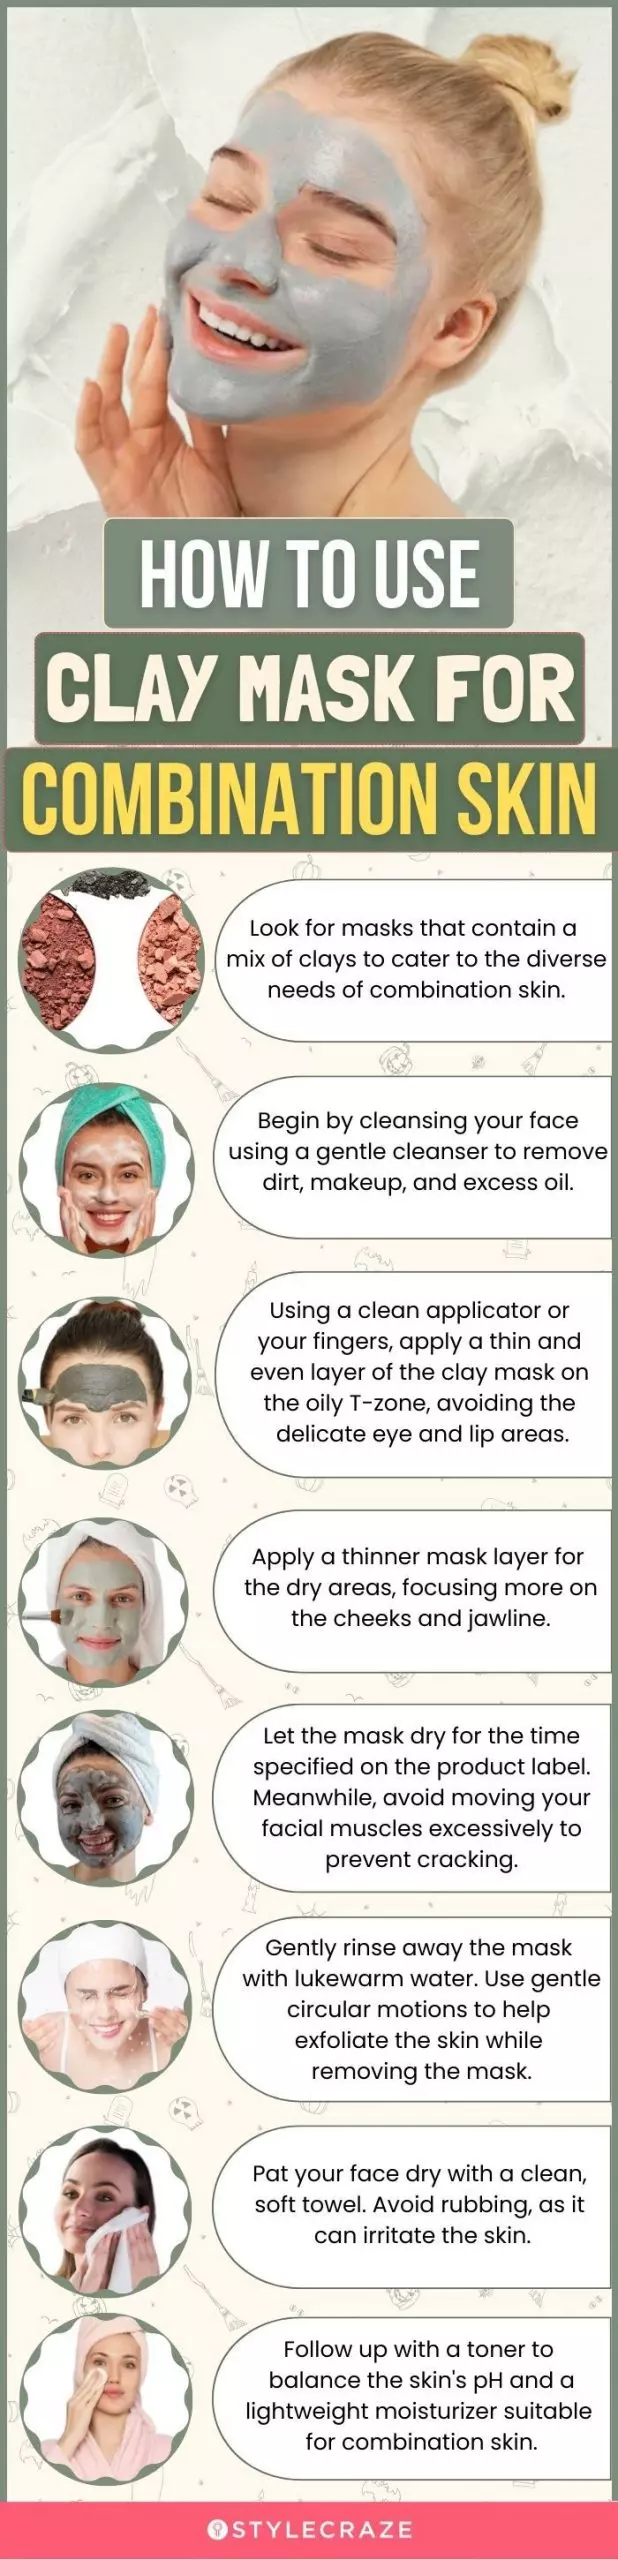 How To Use Clay Mask Guide For Combination Skin (infographic)